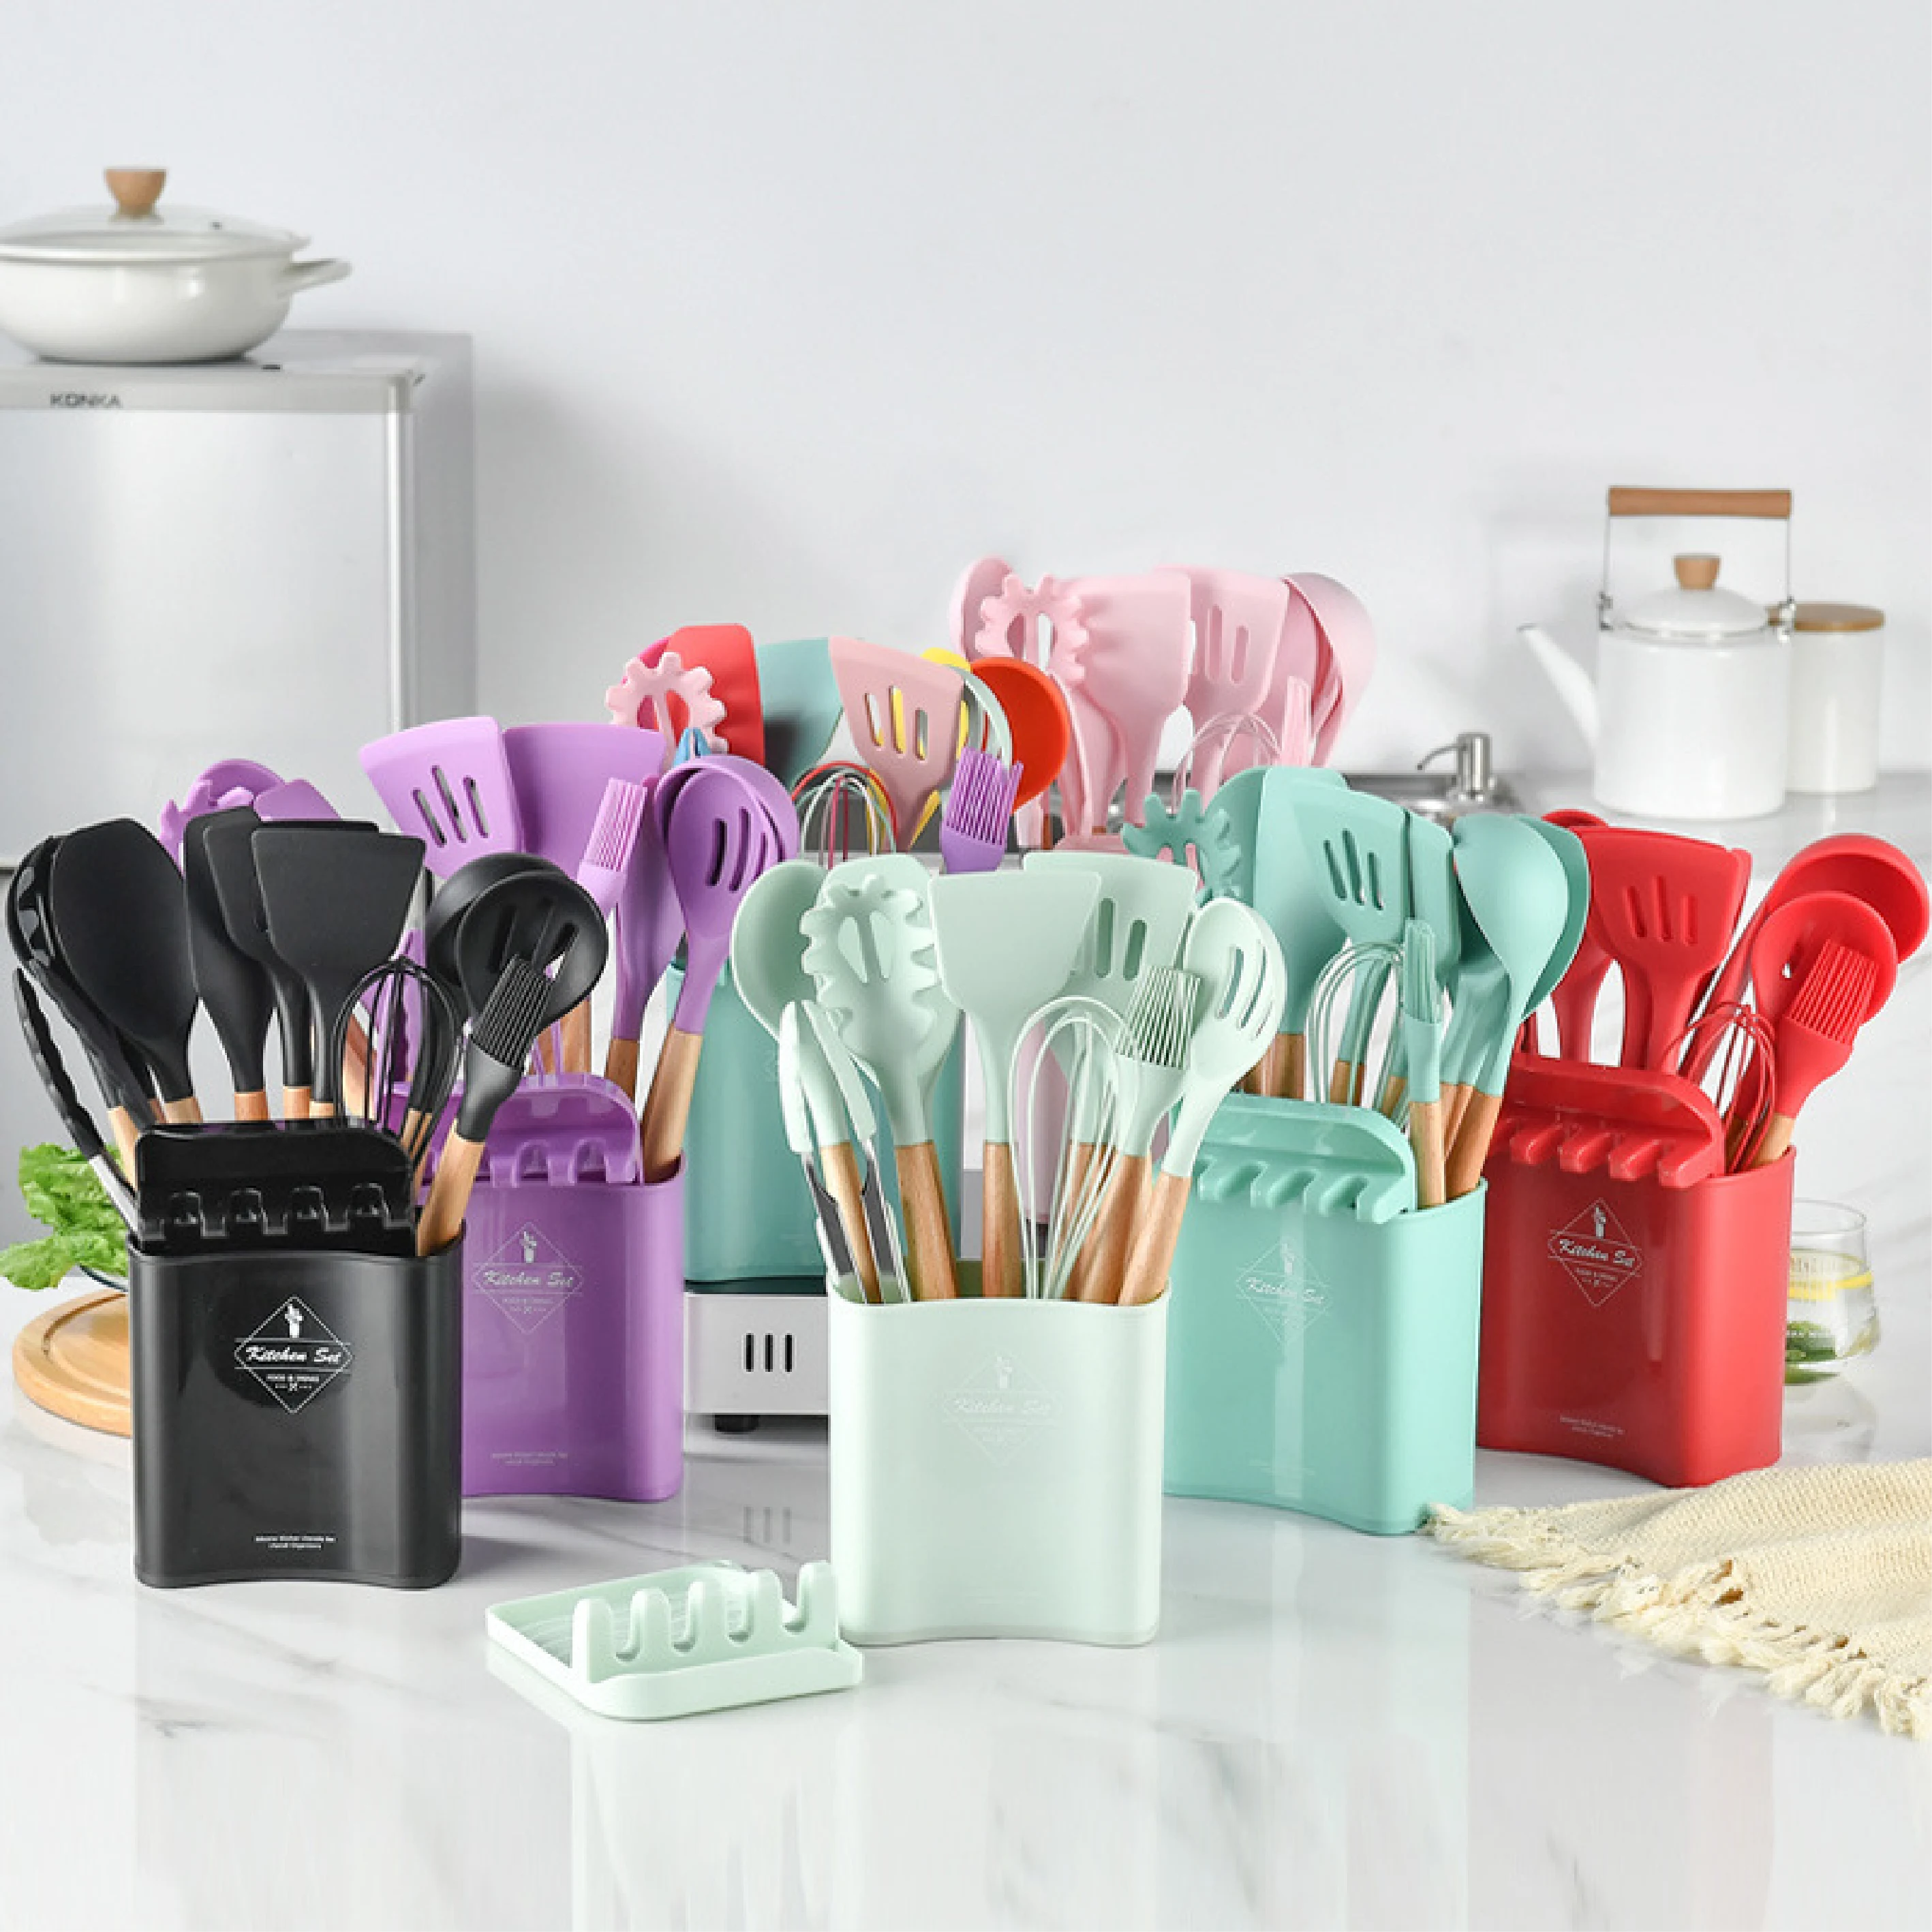 

Best Kitchenware tool Silicone cooking Kitchen Utensil Set With Wooden Handle holder Accessories Spatula Turner Ladle cookware, Customized